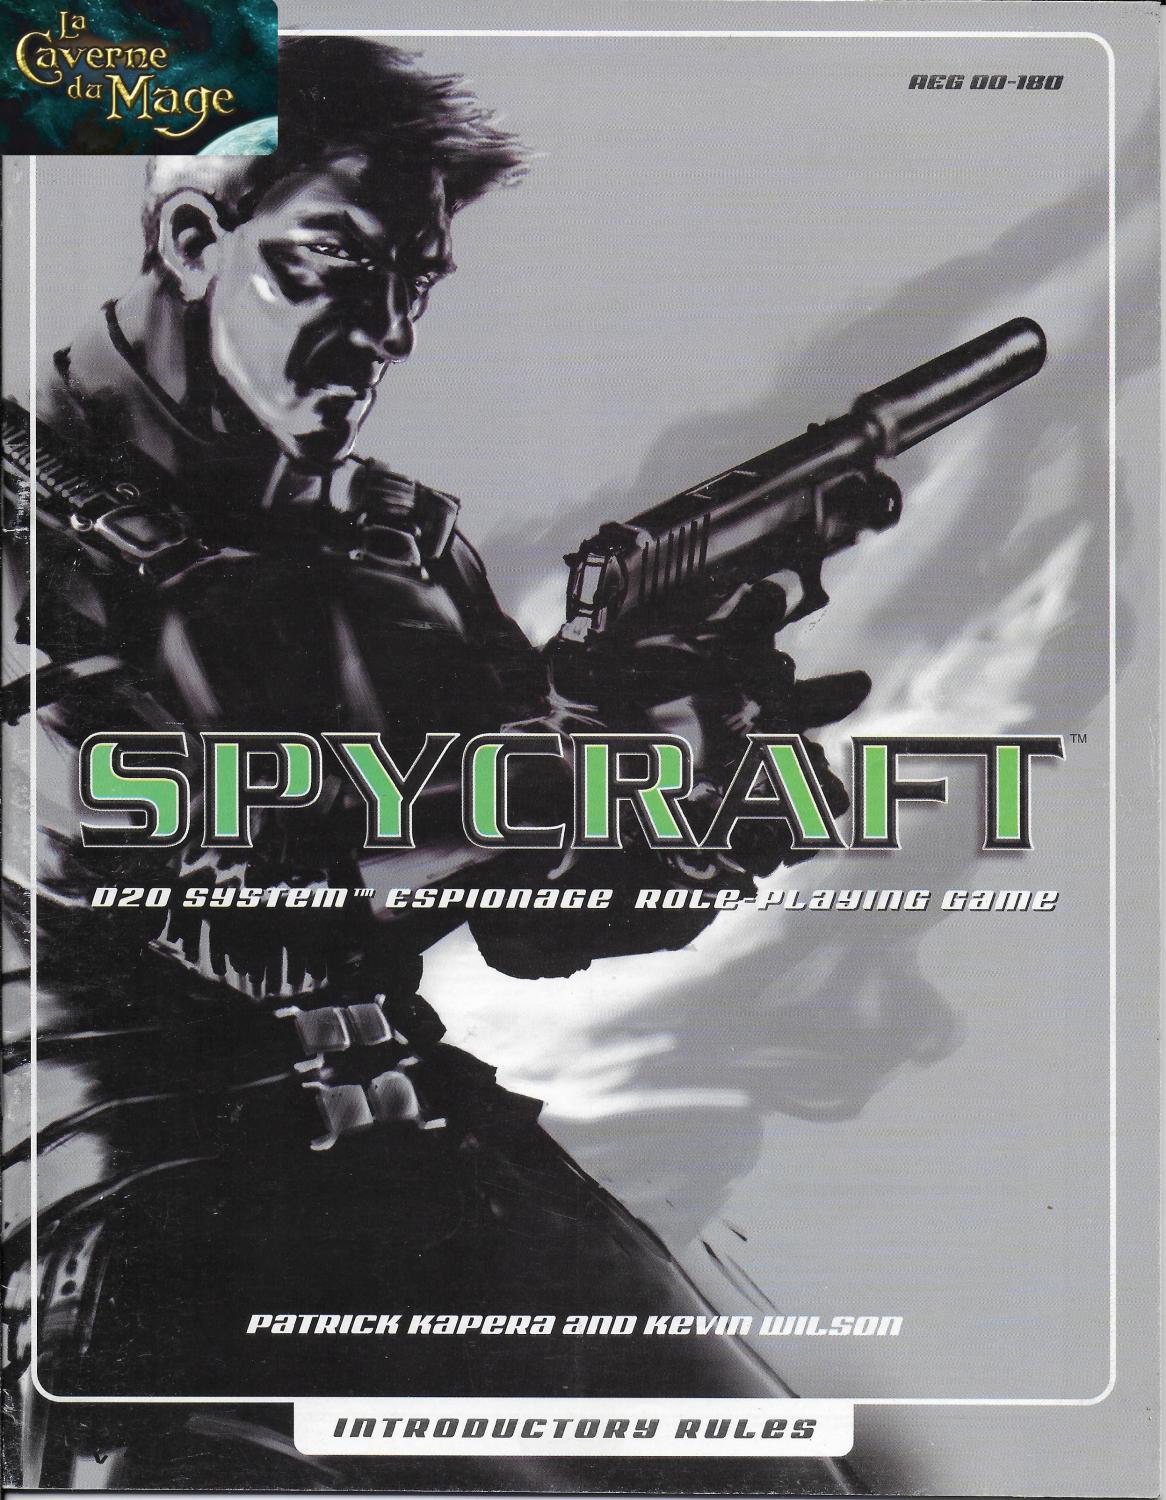 SPYCRAFT - Introductory Rules